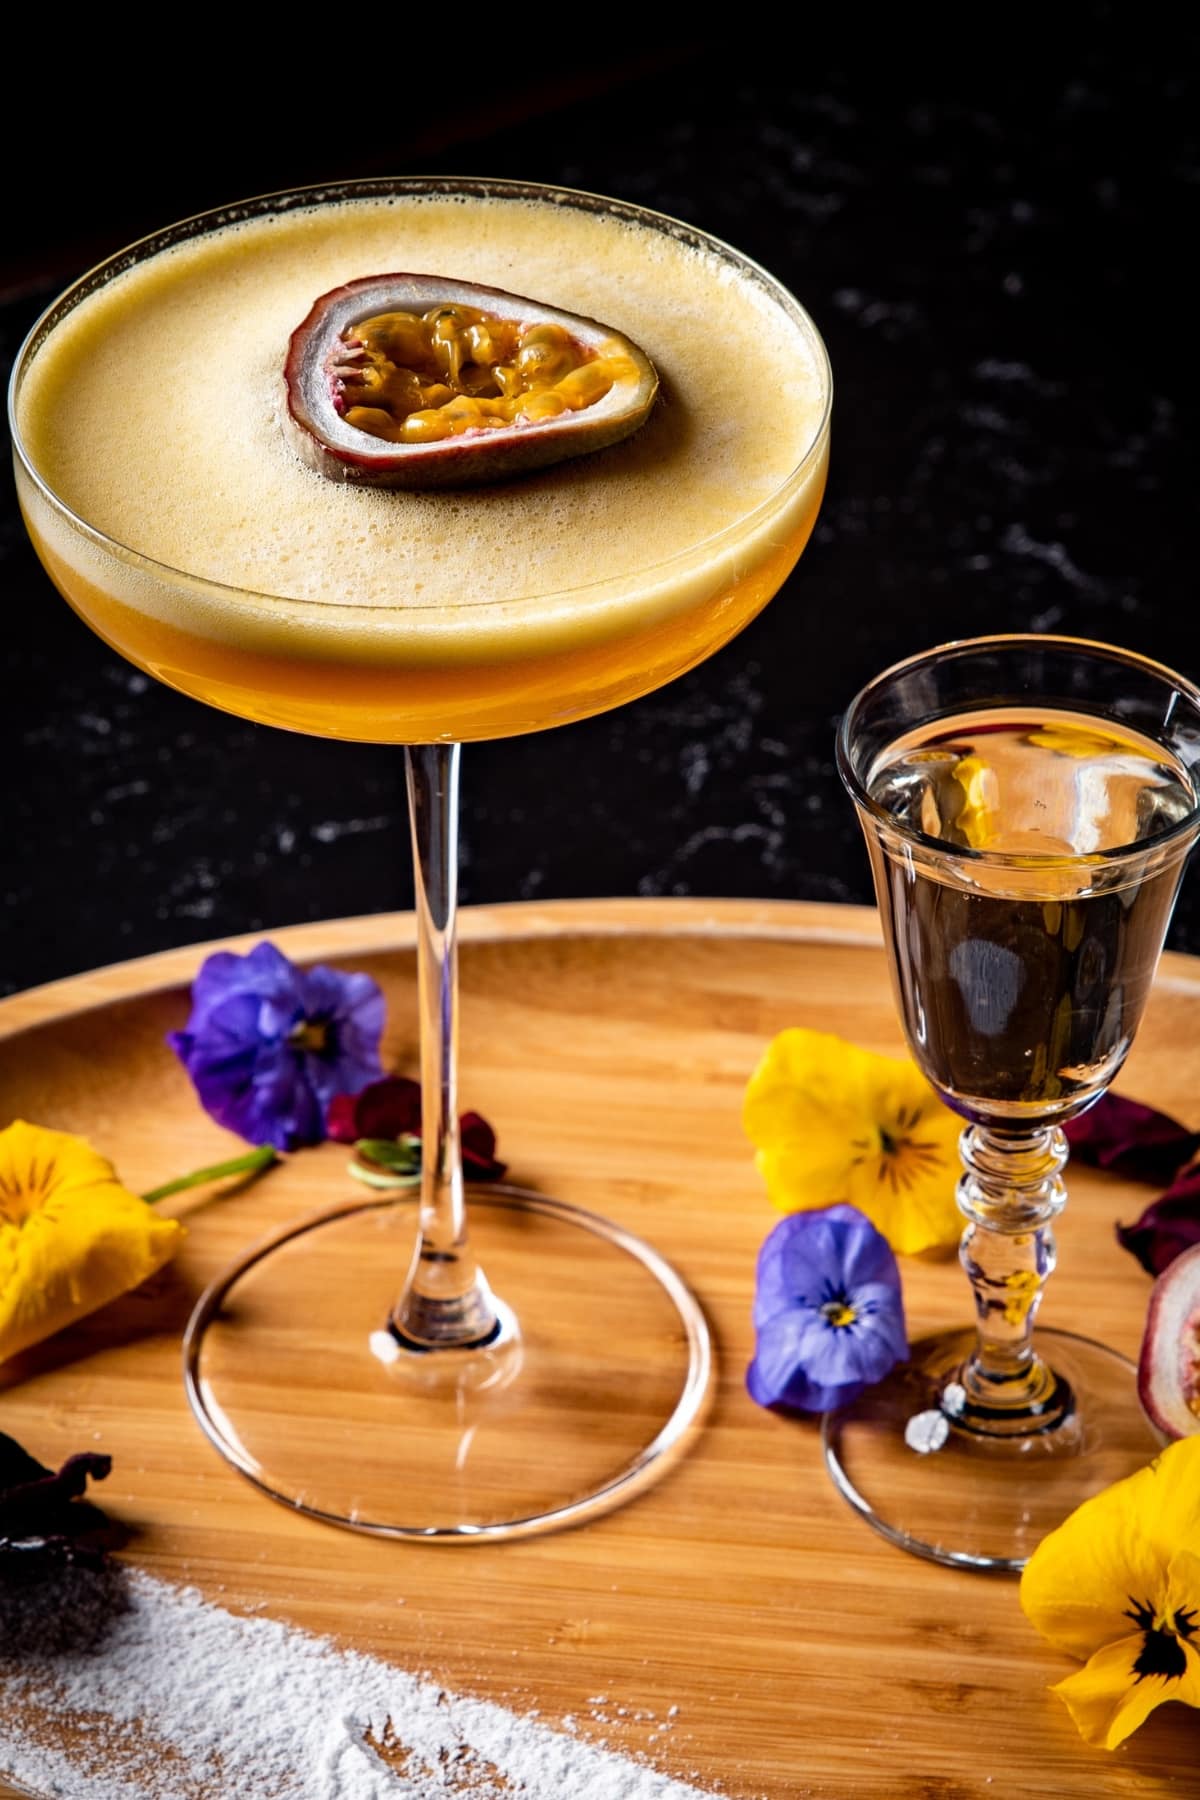 Porn star martini and proseco garnished with passion fruit served on a wooden tray.